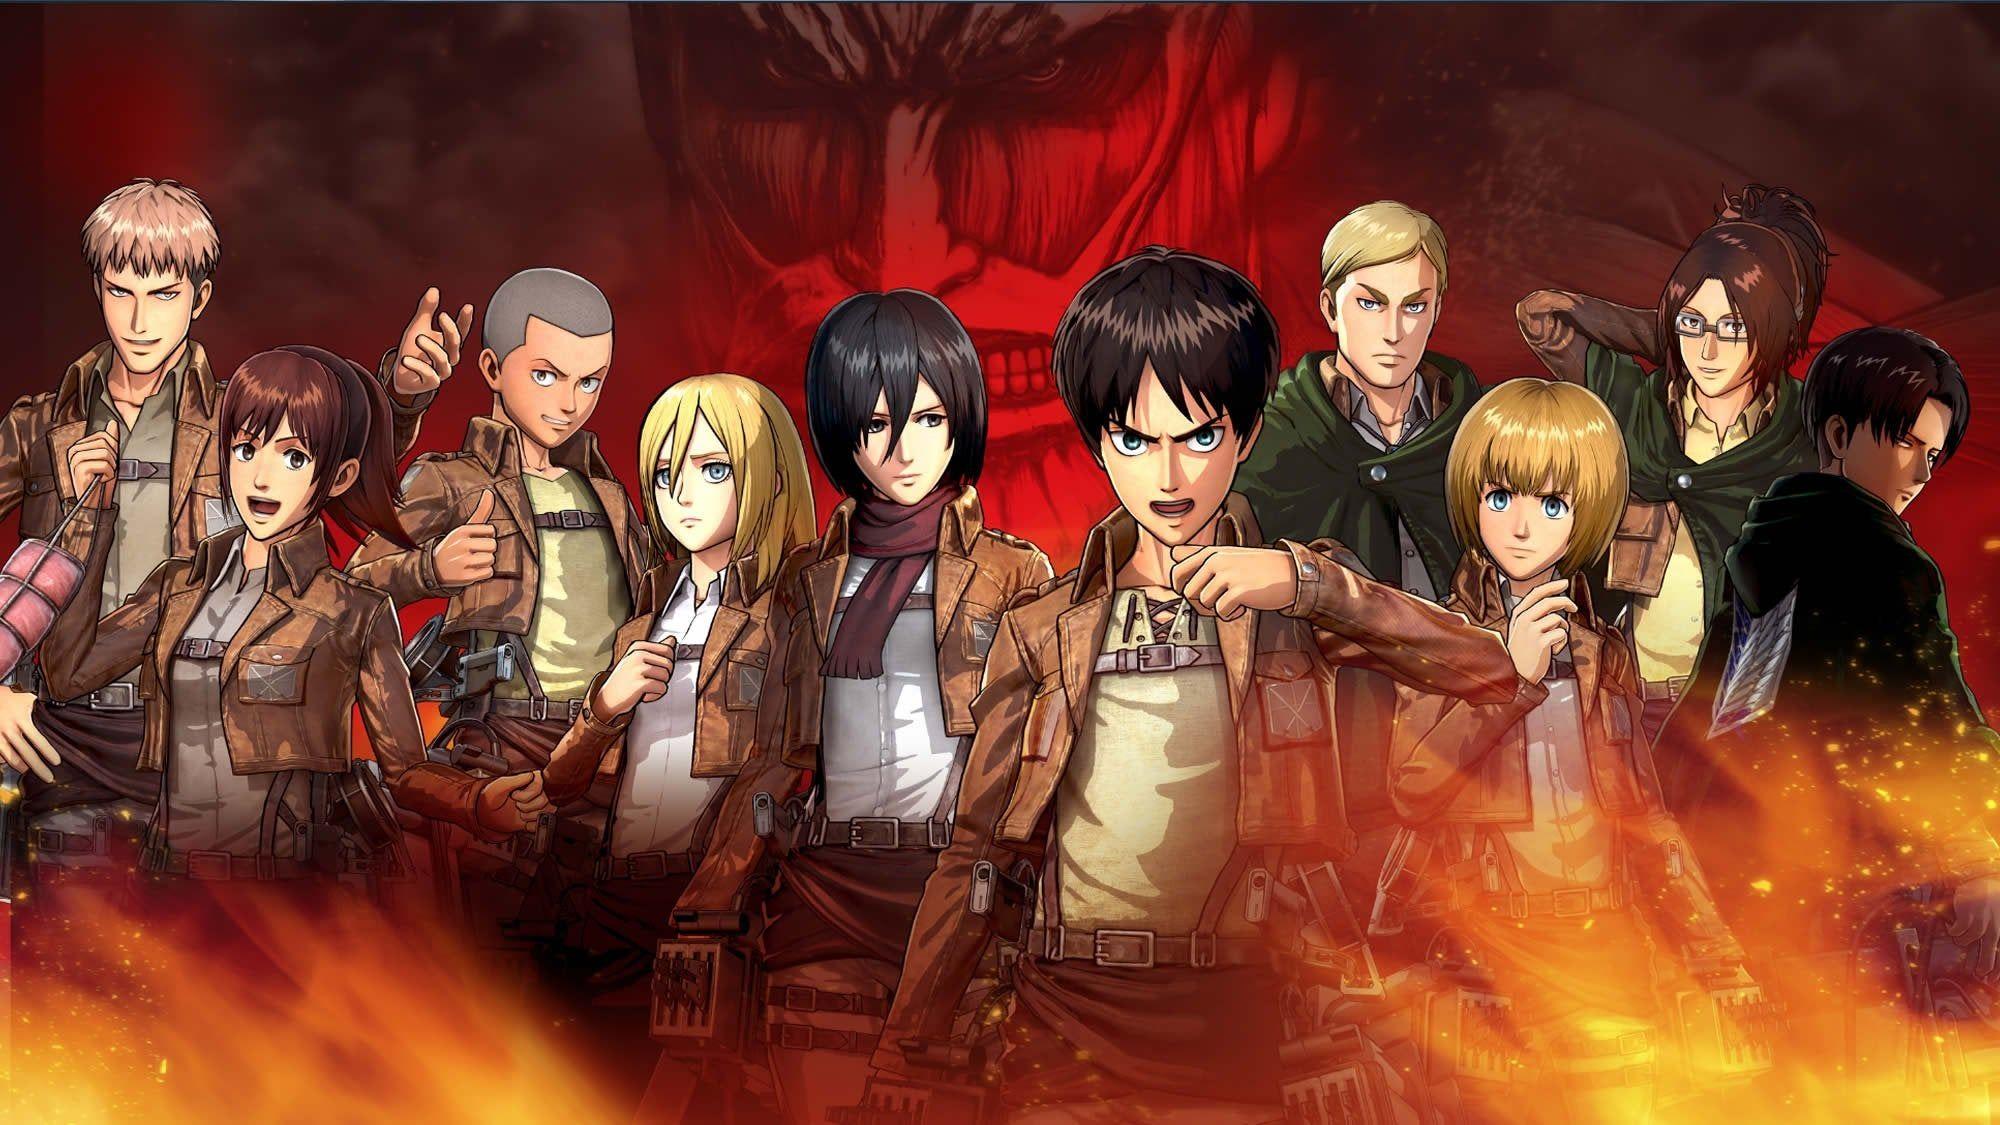 2000 x 1125 · jpeg - Anime AOT PS4 Wallpapers - Wallpaper Cave